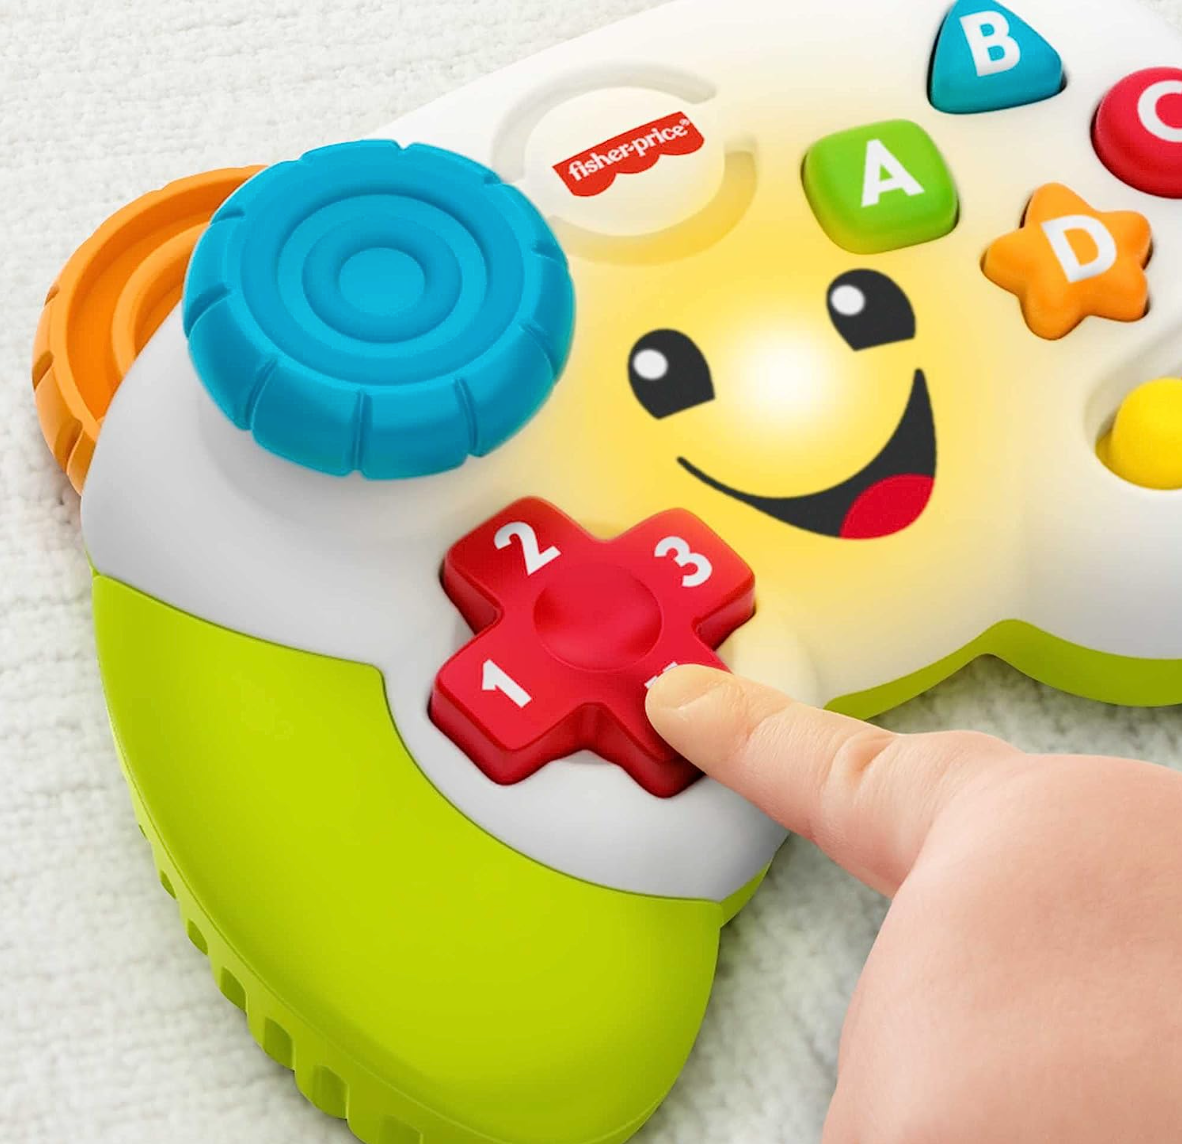 Fisher-Price Laugh & Learn Baby & Toddler Toy Game & Learn Controller Pretend Video Game with Music Lights & Activities Ages 6+ Months